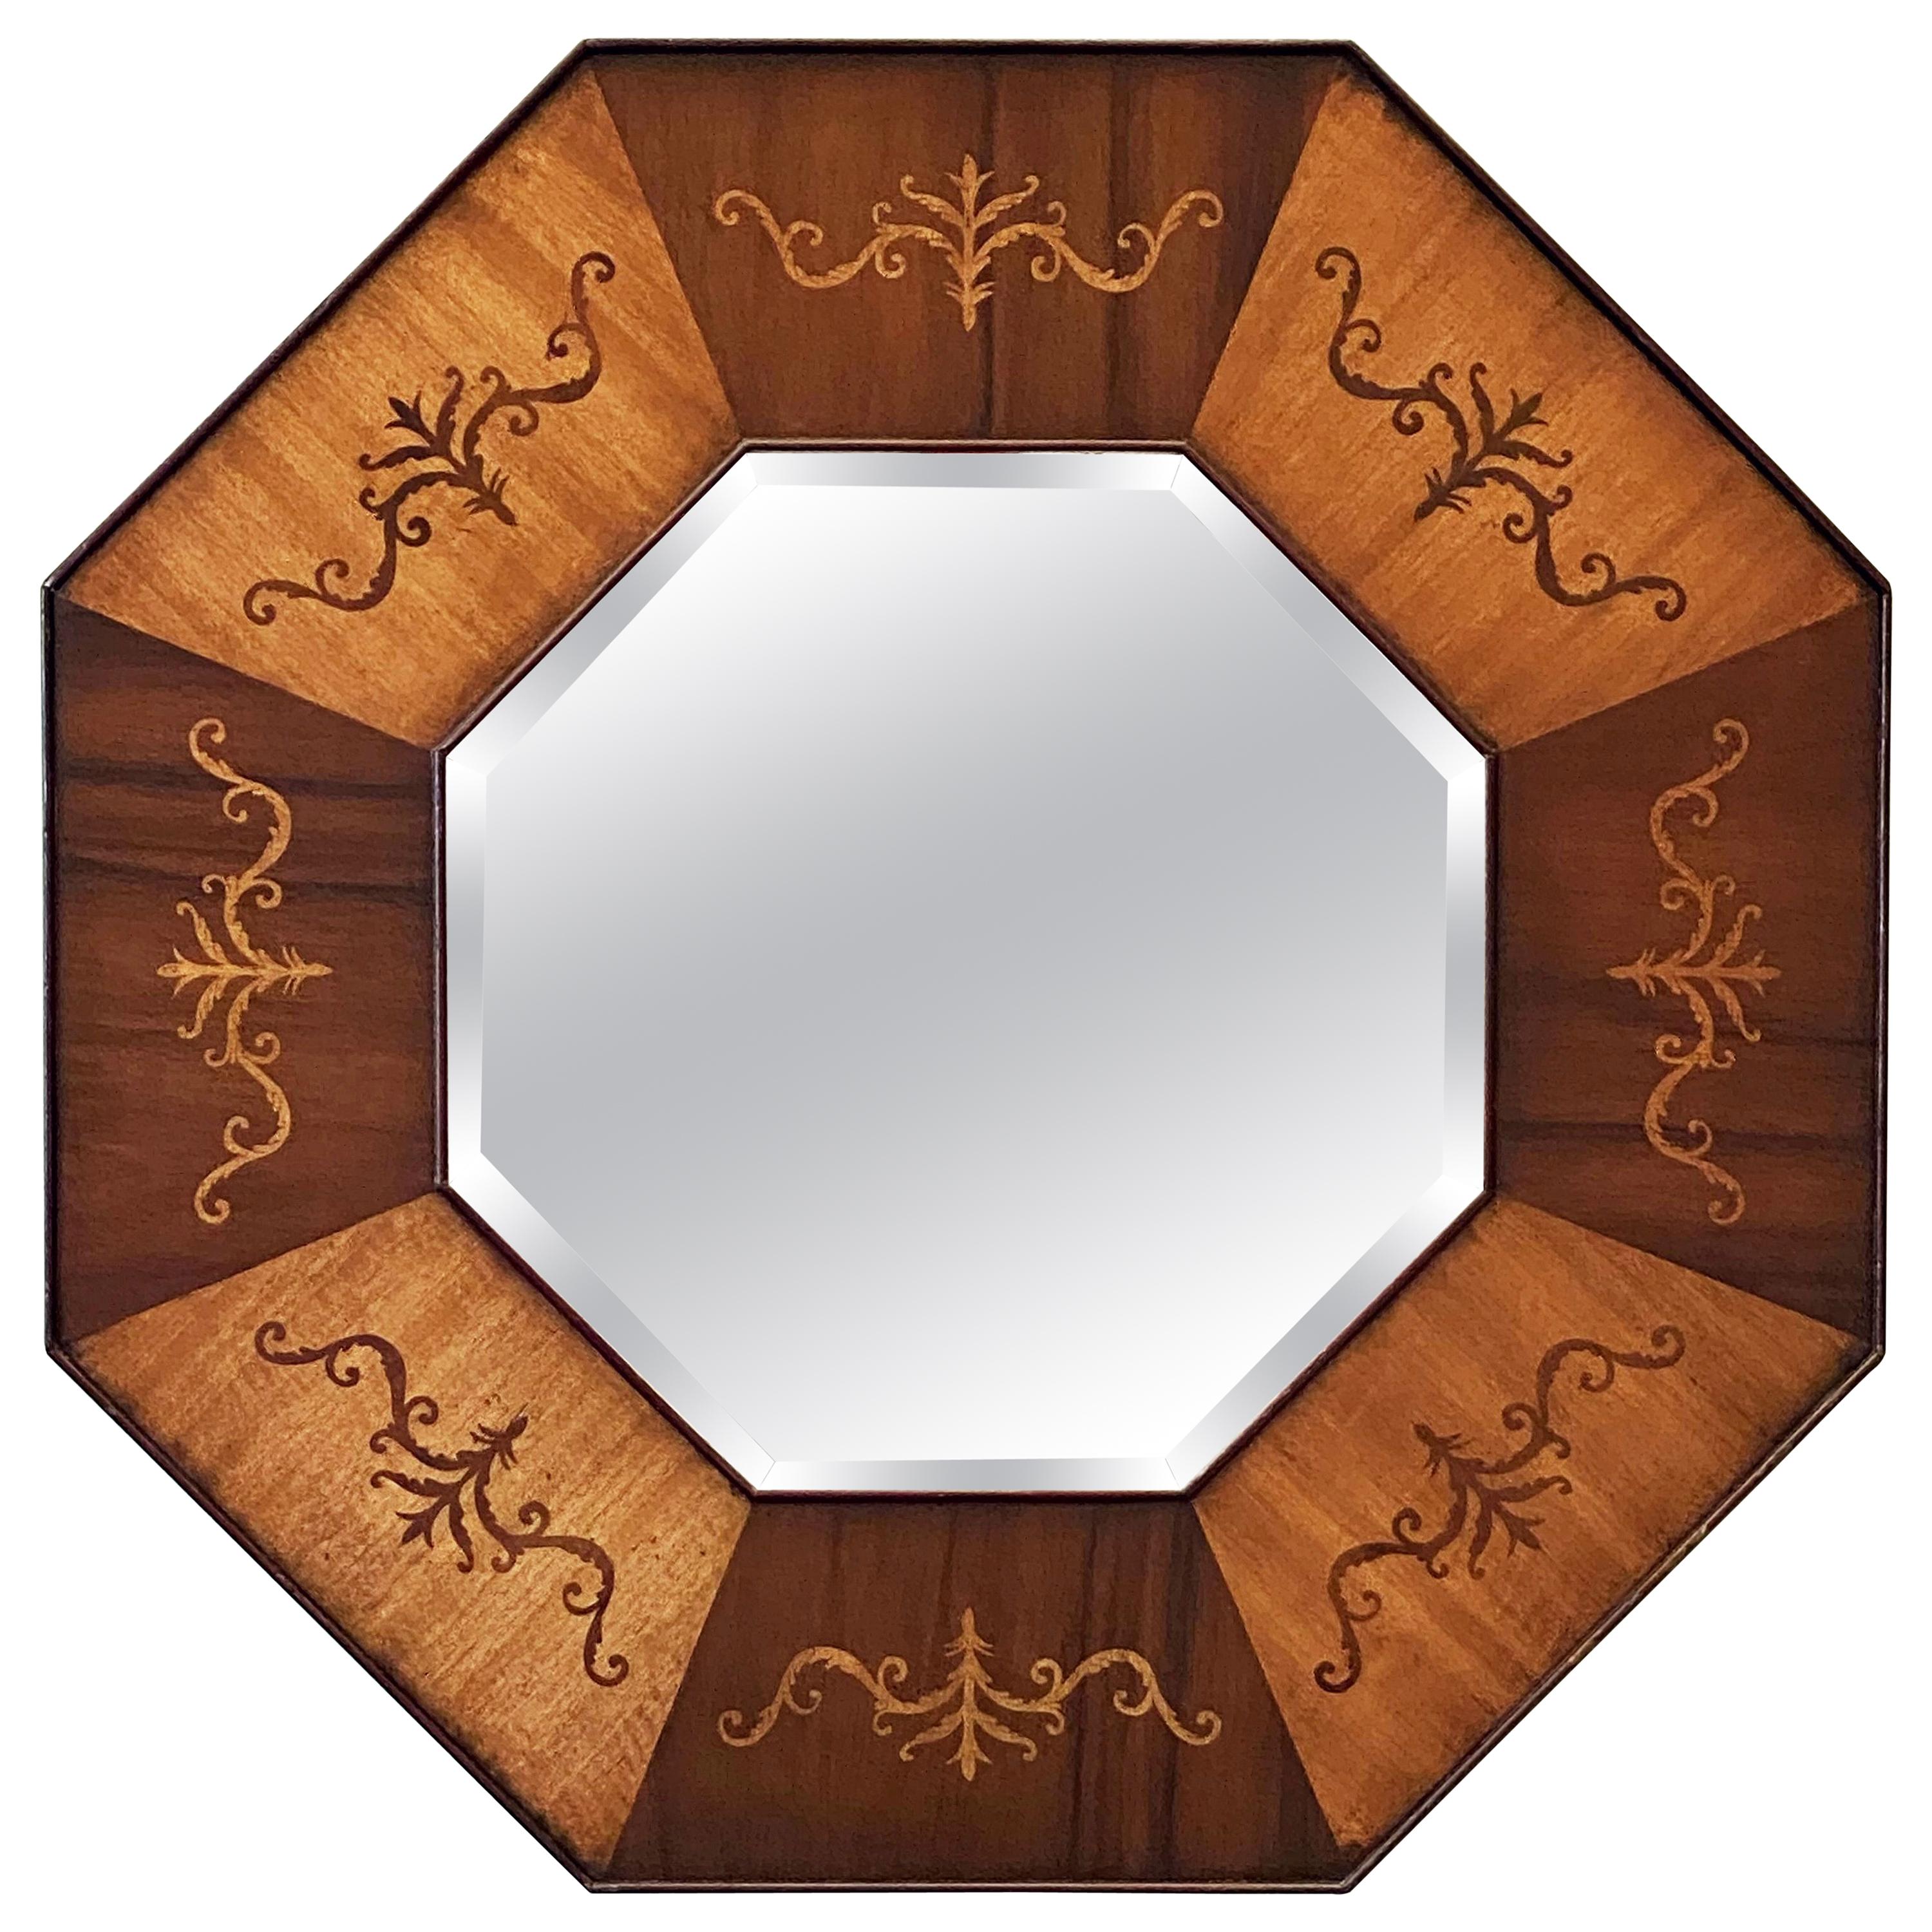 Octagonal Beveled Mirror with Inlaid Frame of Mahogany from England